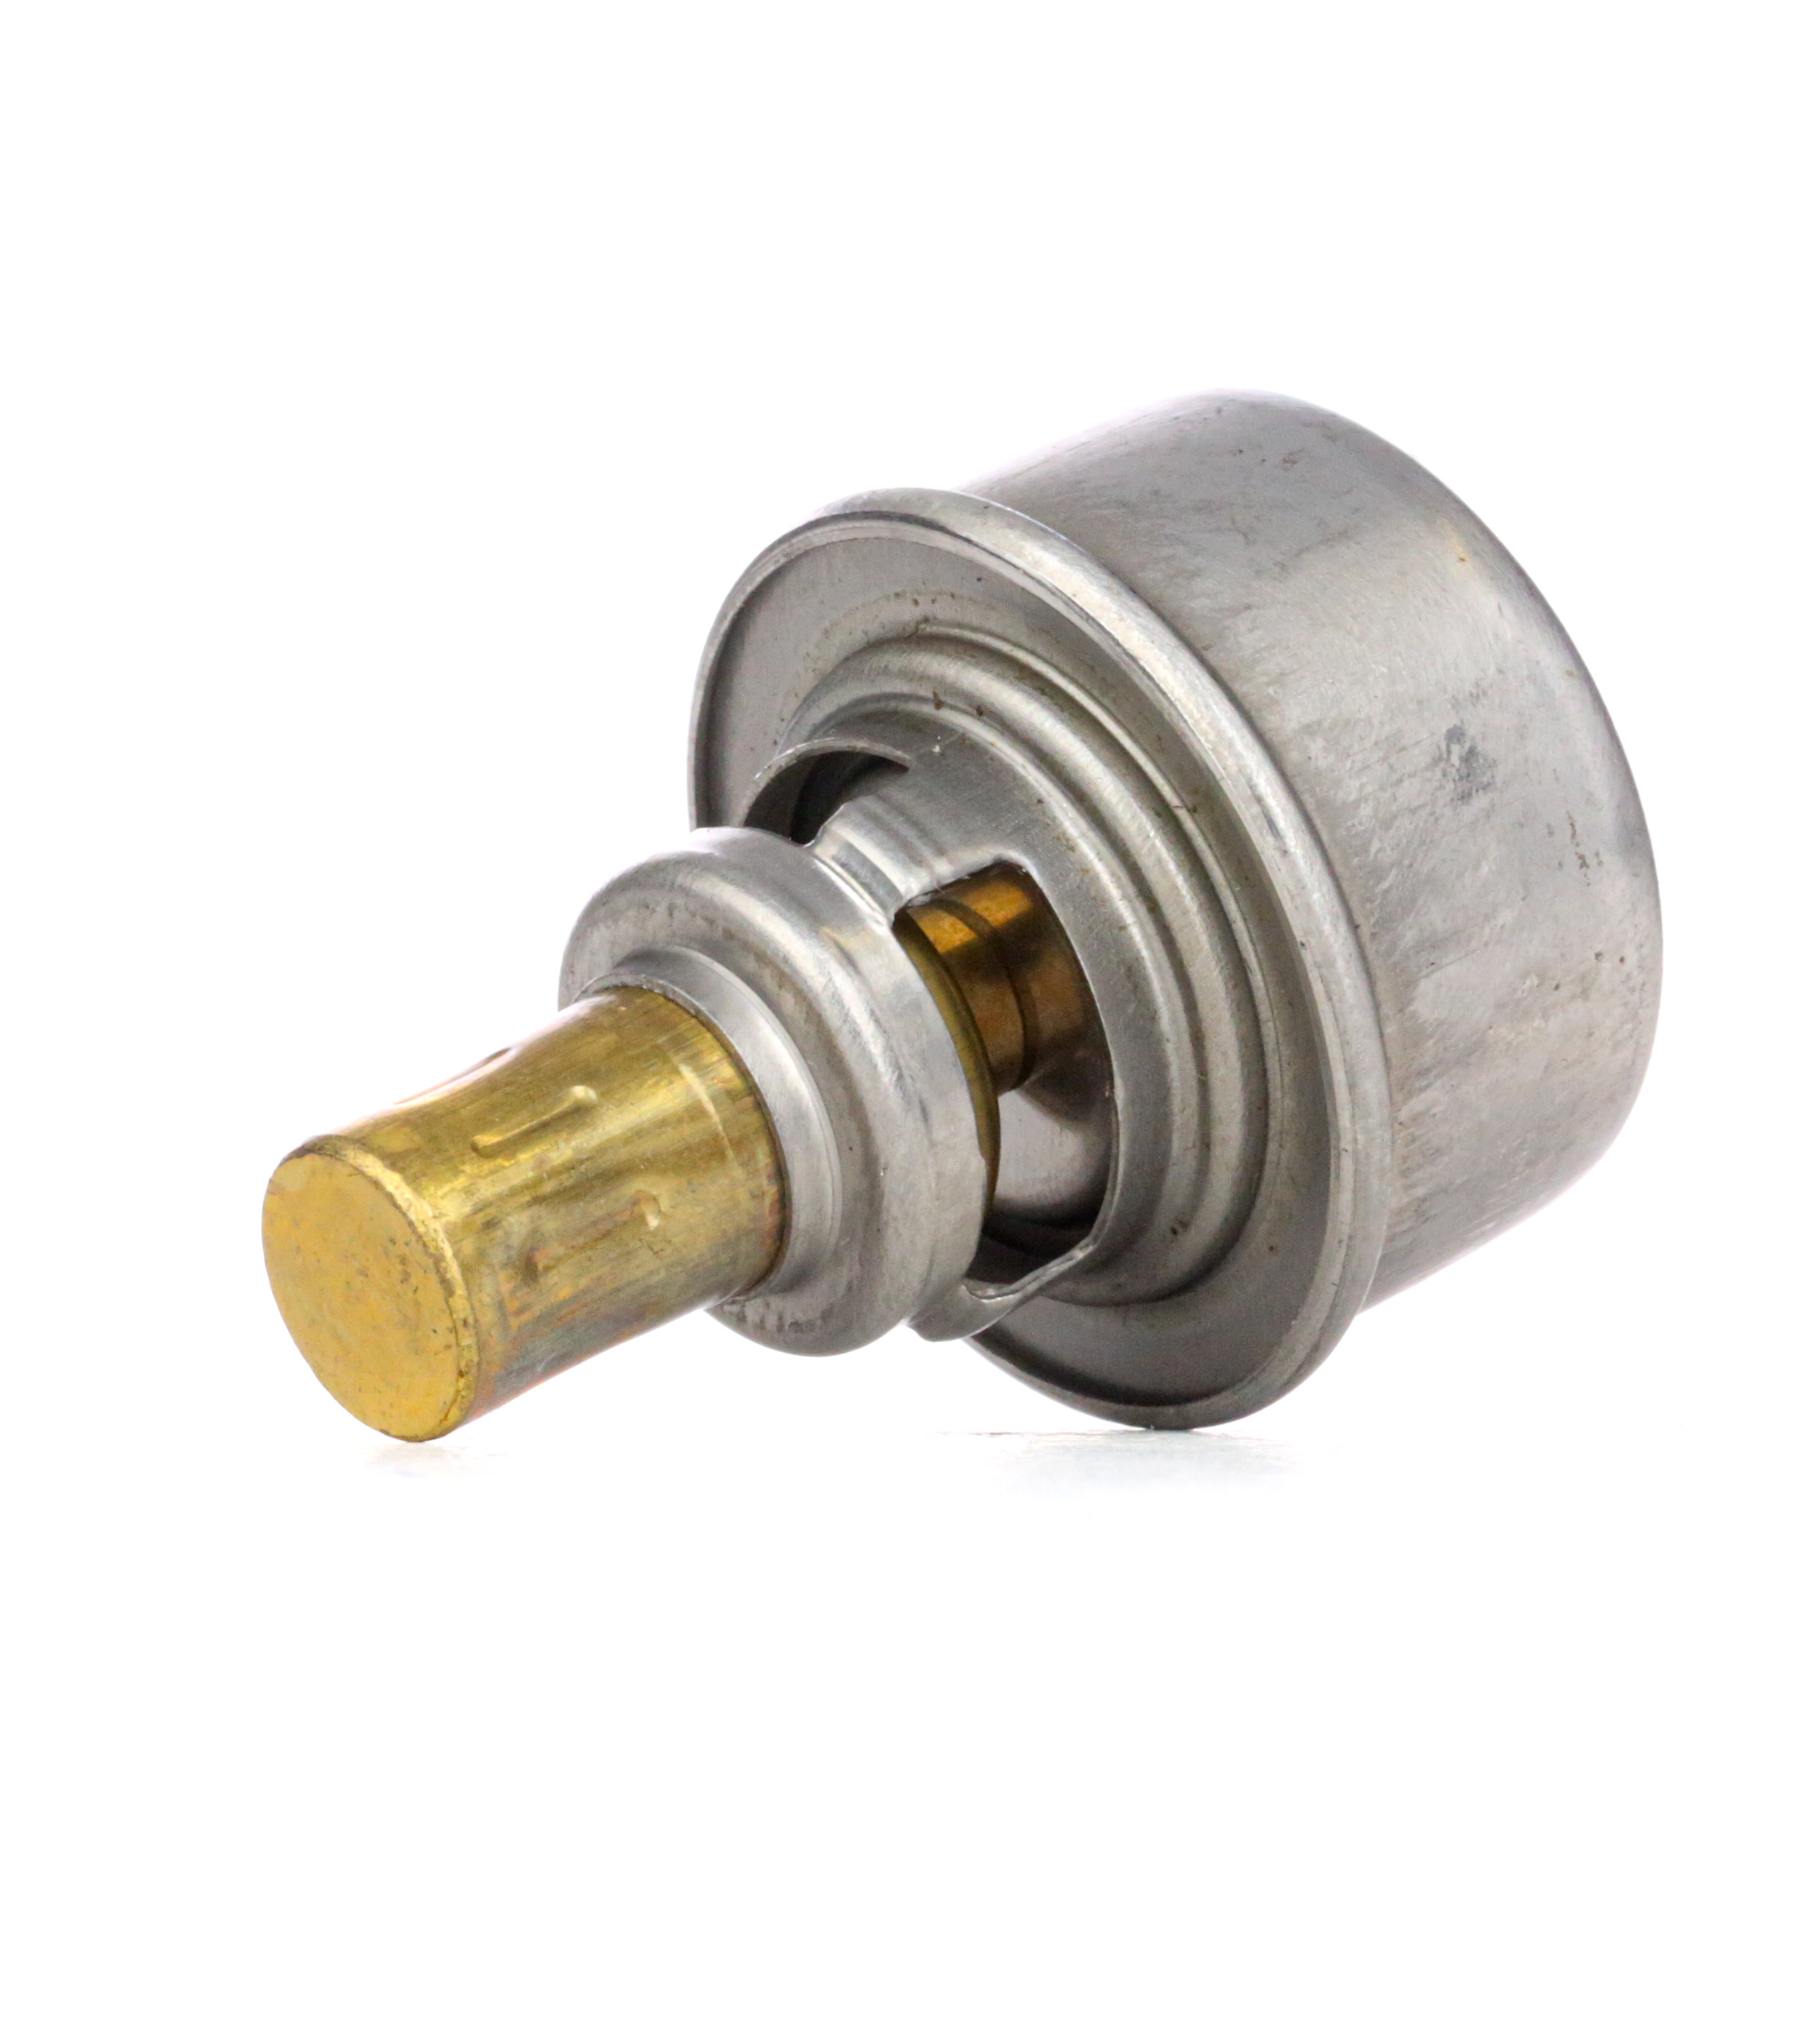 STARK SKTC-0560076 Engine thermostat Opening Temperature: 89°C, without housing